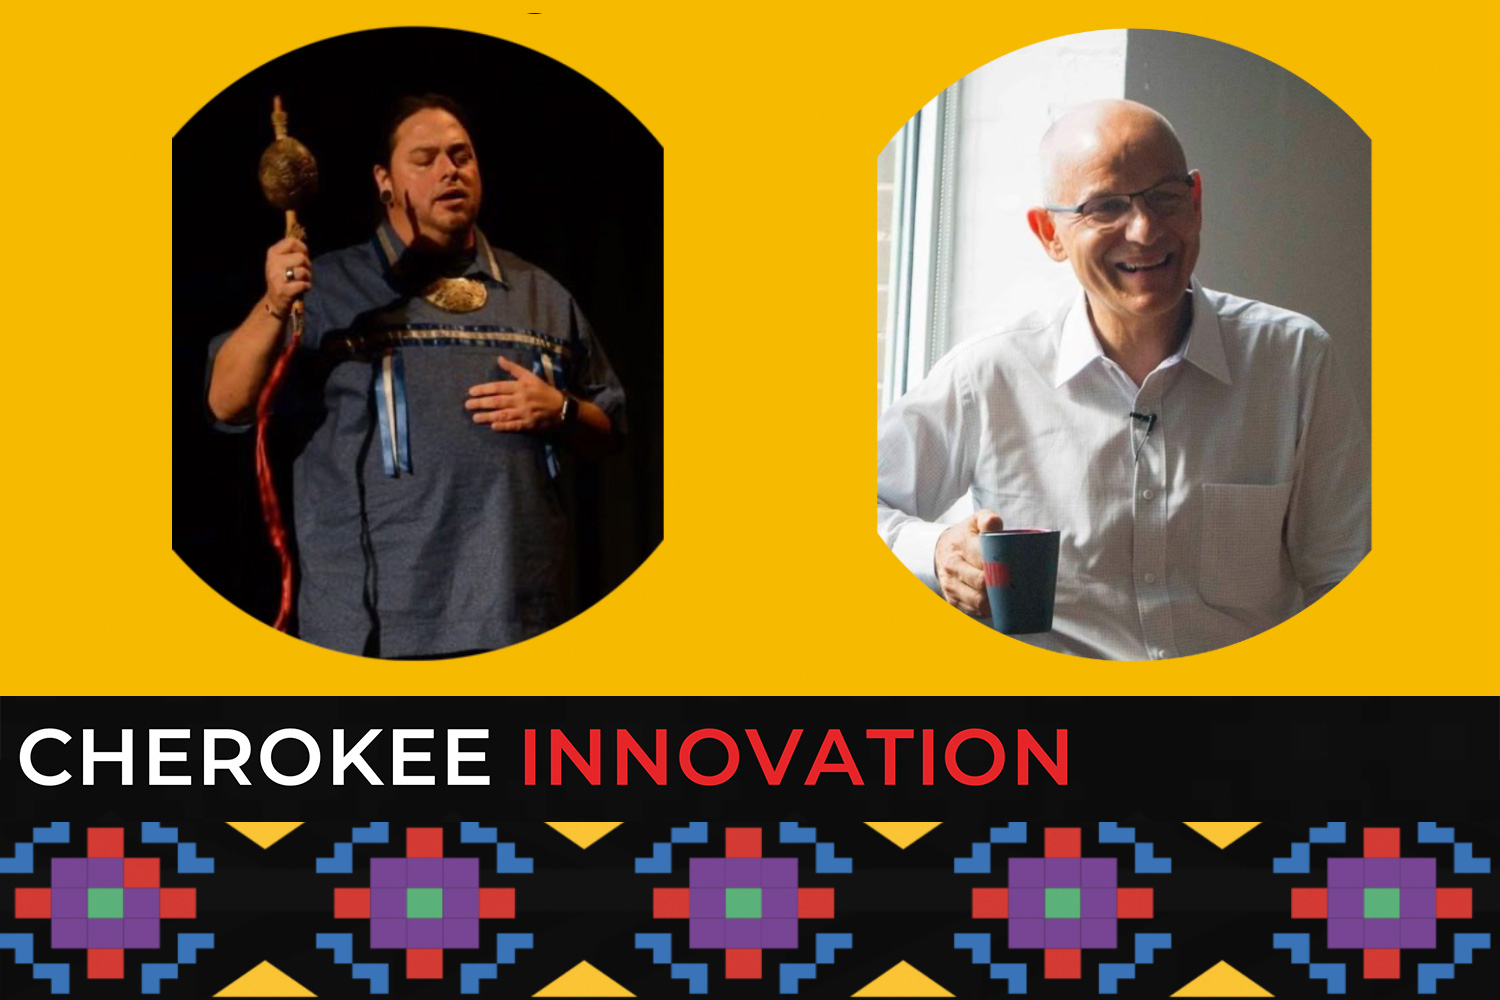 In a presentation profiling four Cherokee innovators, MIT Professor David Robertson, right, and Cherokee Nation Developer of Adult Immersion Language Revitalization Programs Wahde Galisgewi, left, showed how Cherokee culture holds lessons for innovators of all backgrounds.